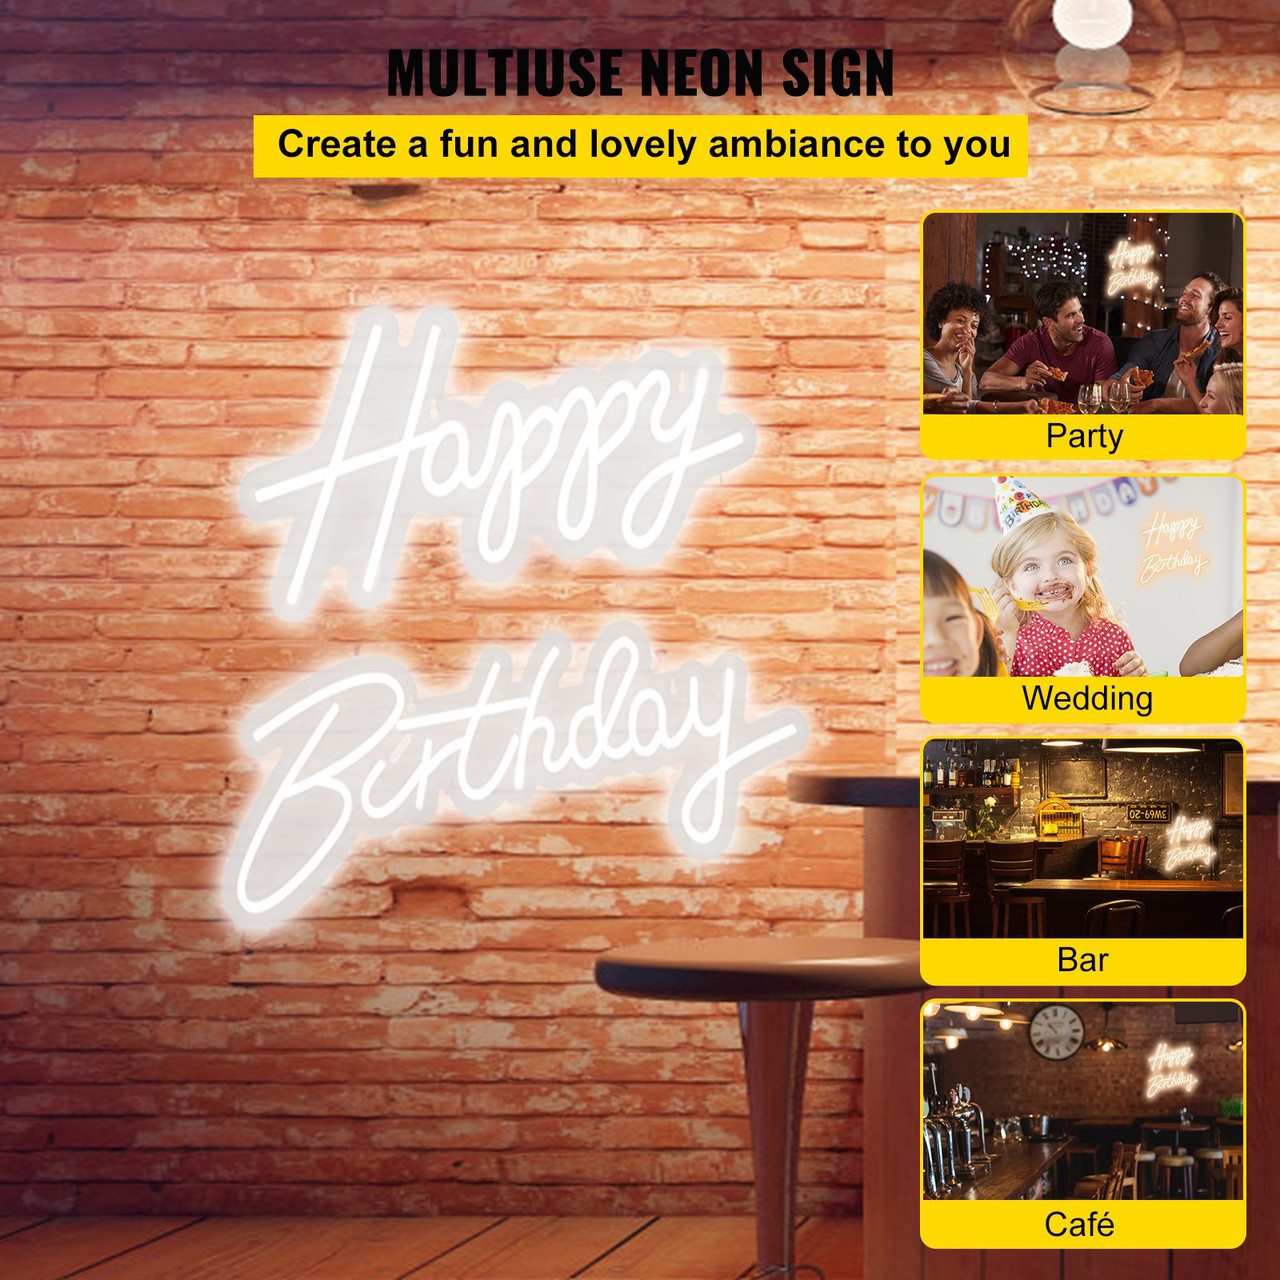 Happy Birthday Neon Sign, 16.5" x 8" + 23" x 8" LED Neon Lights Signs, Adjustable Brightness w/ Remote Control and Power Adapter, Reusable for Party, Club, Celebration and Decoration White